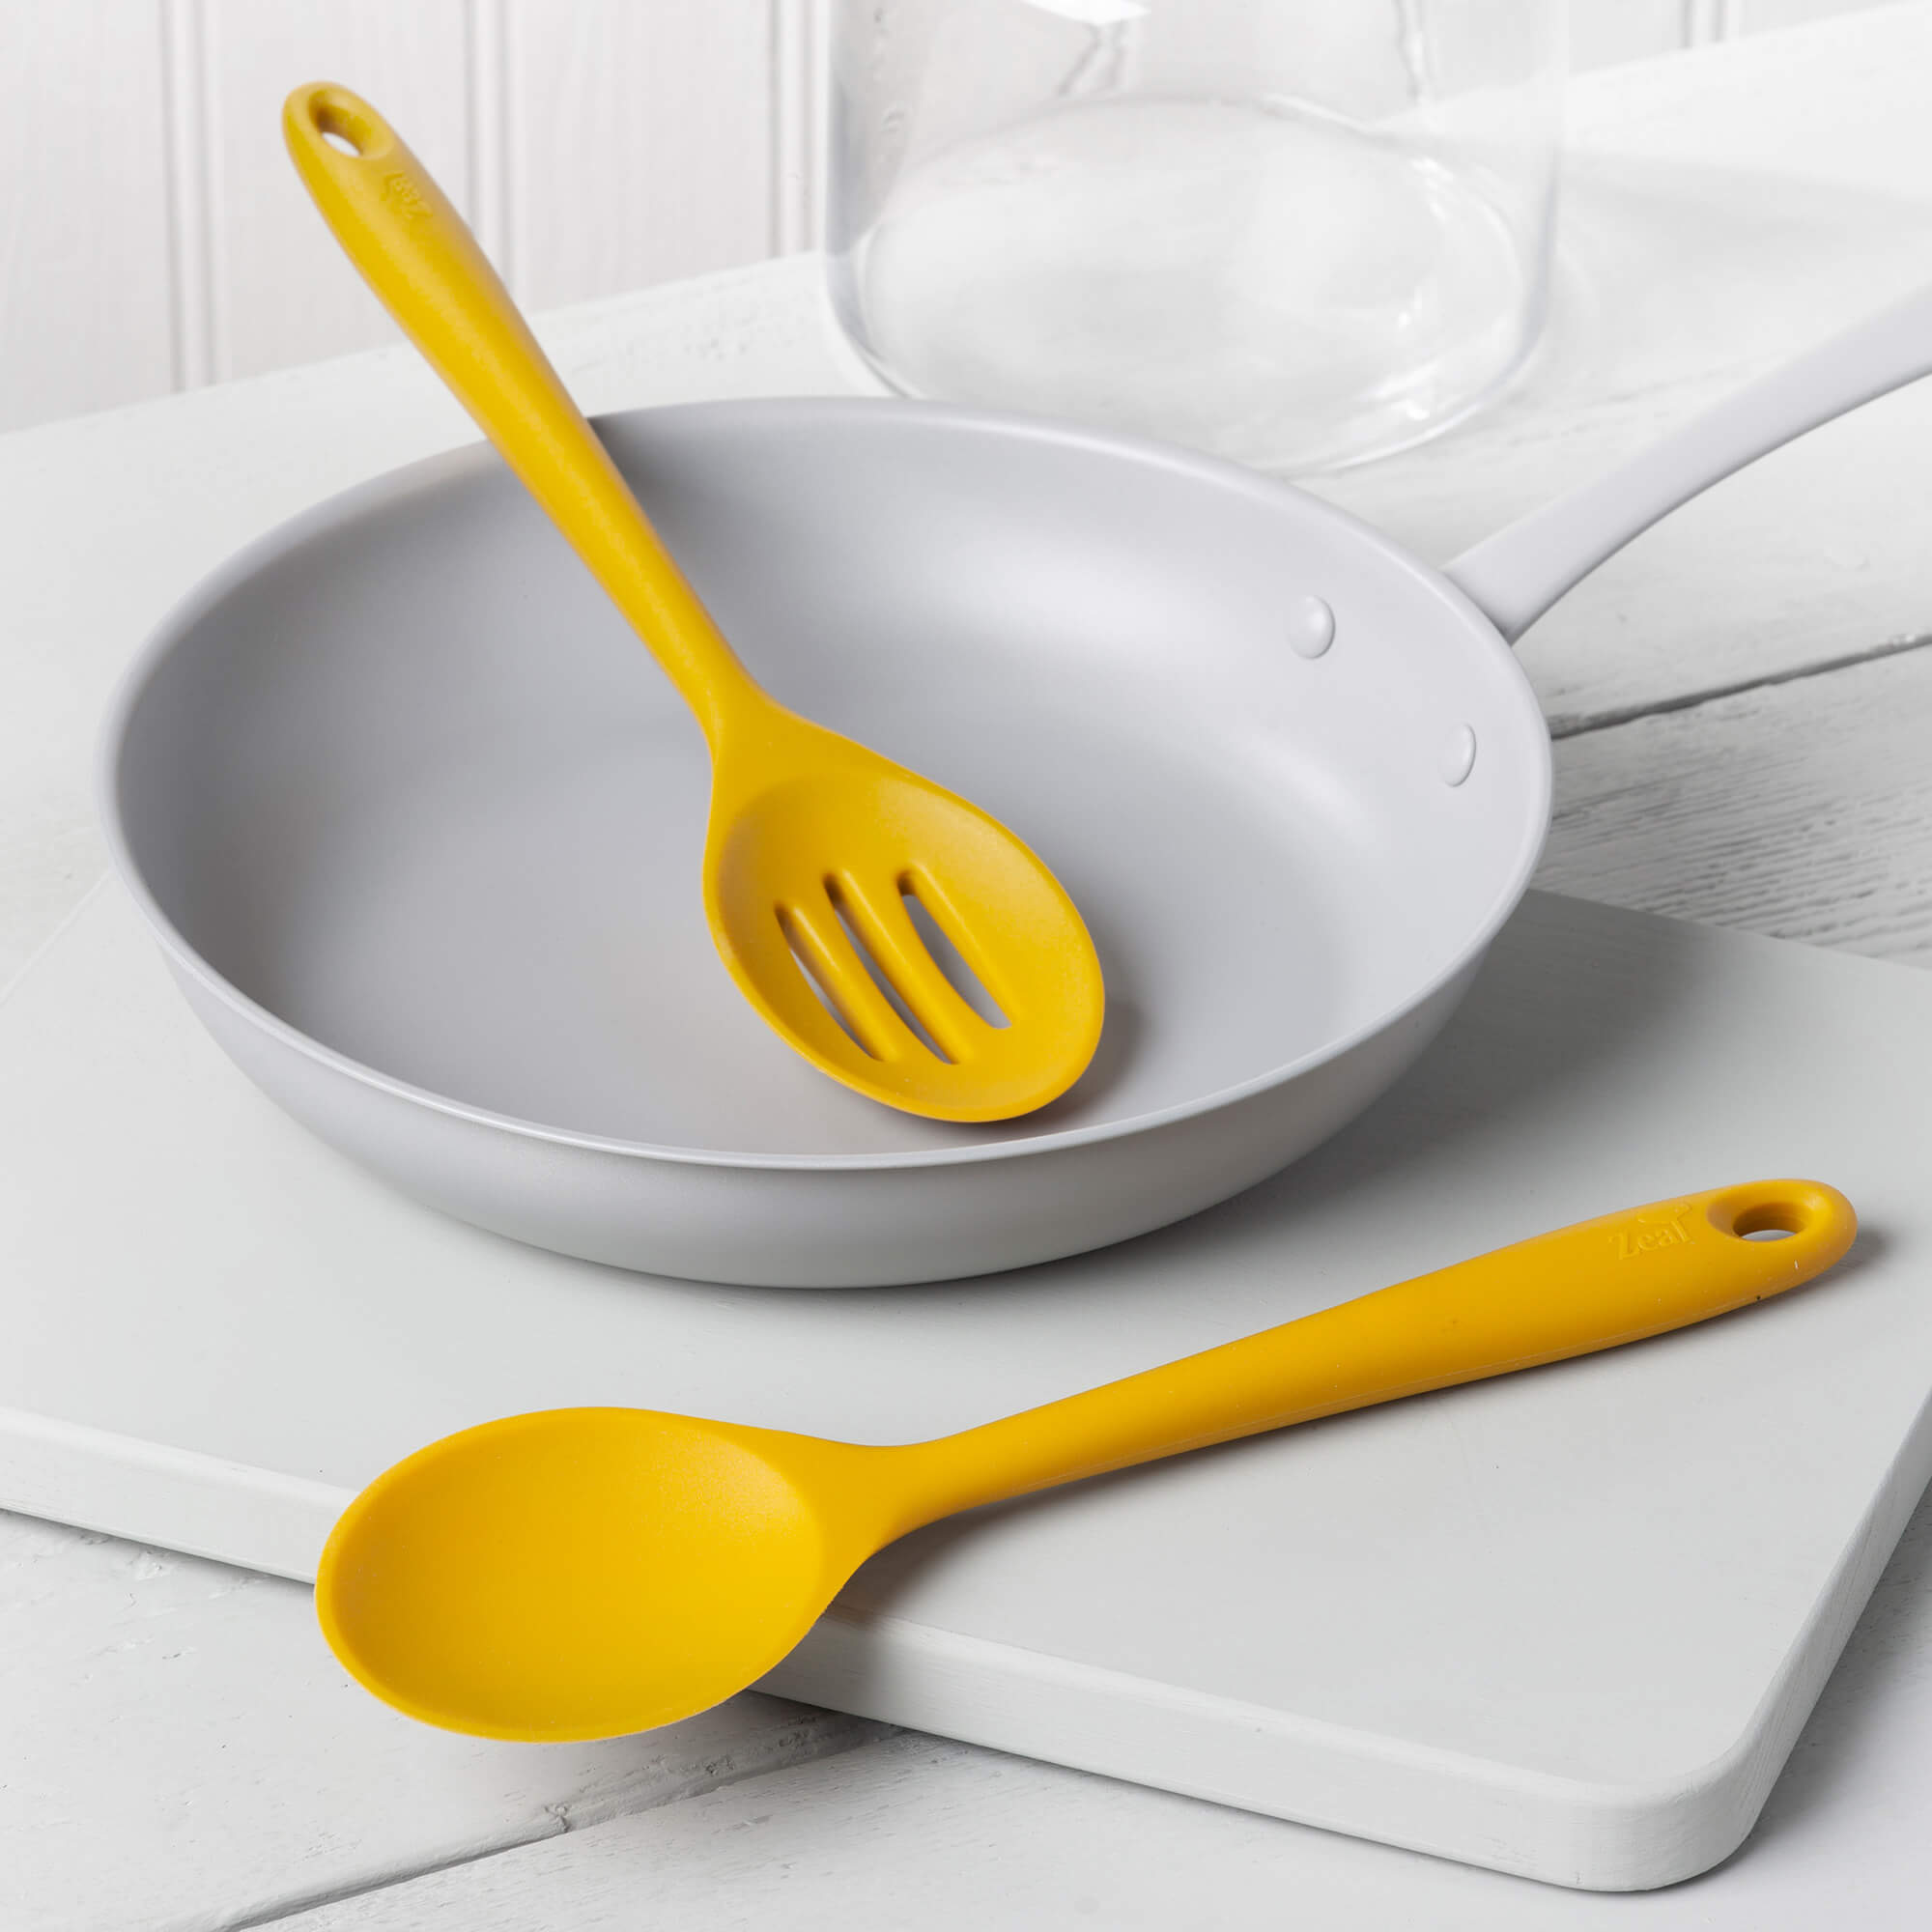 Spoon & Slotted Spoon Set